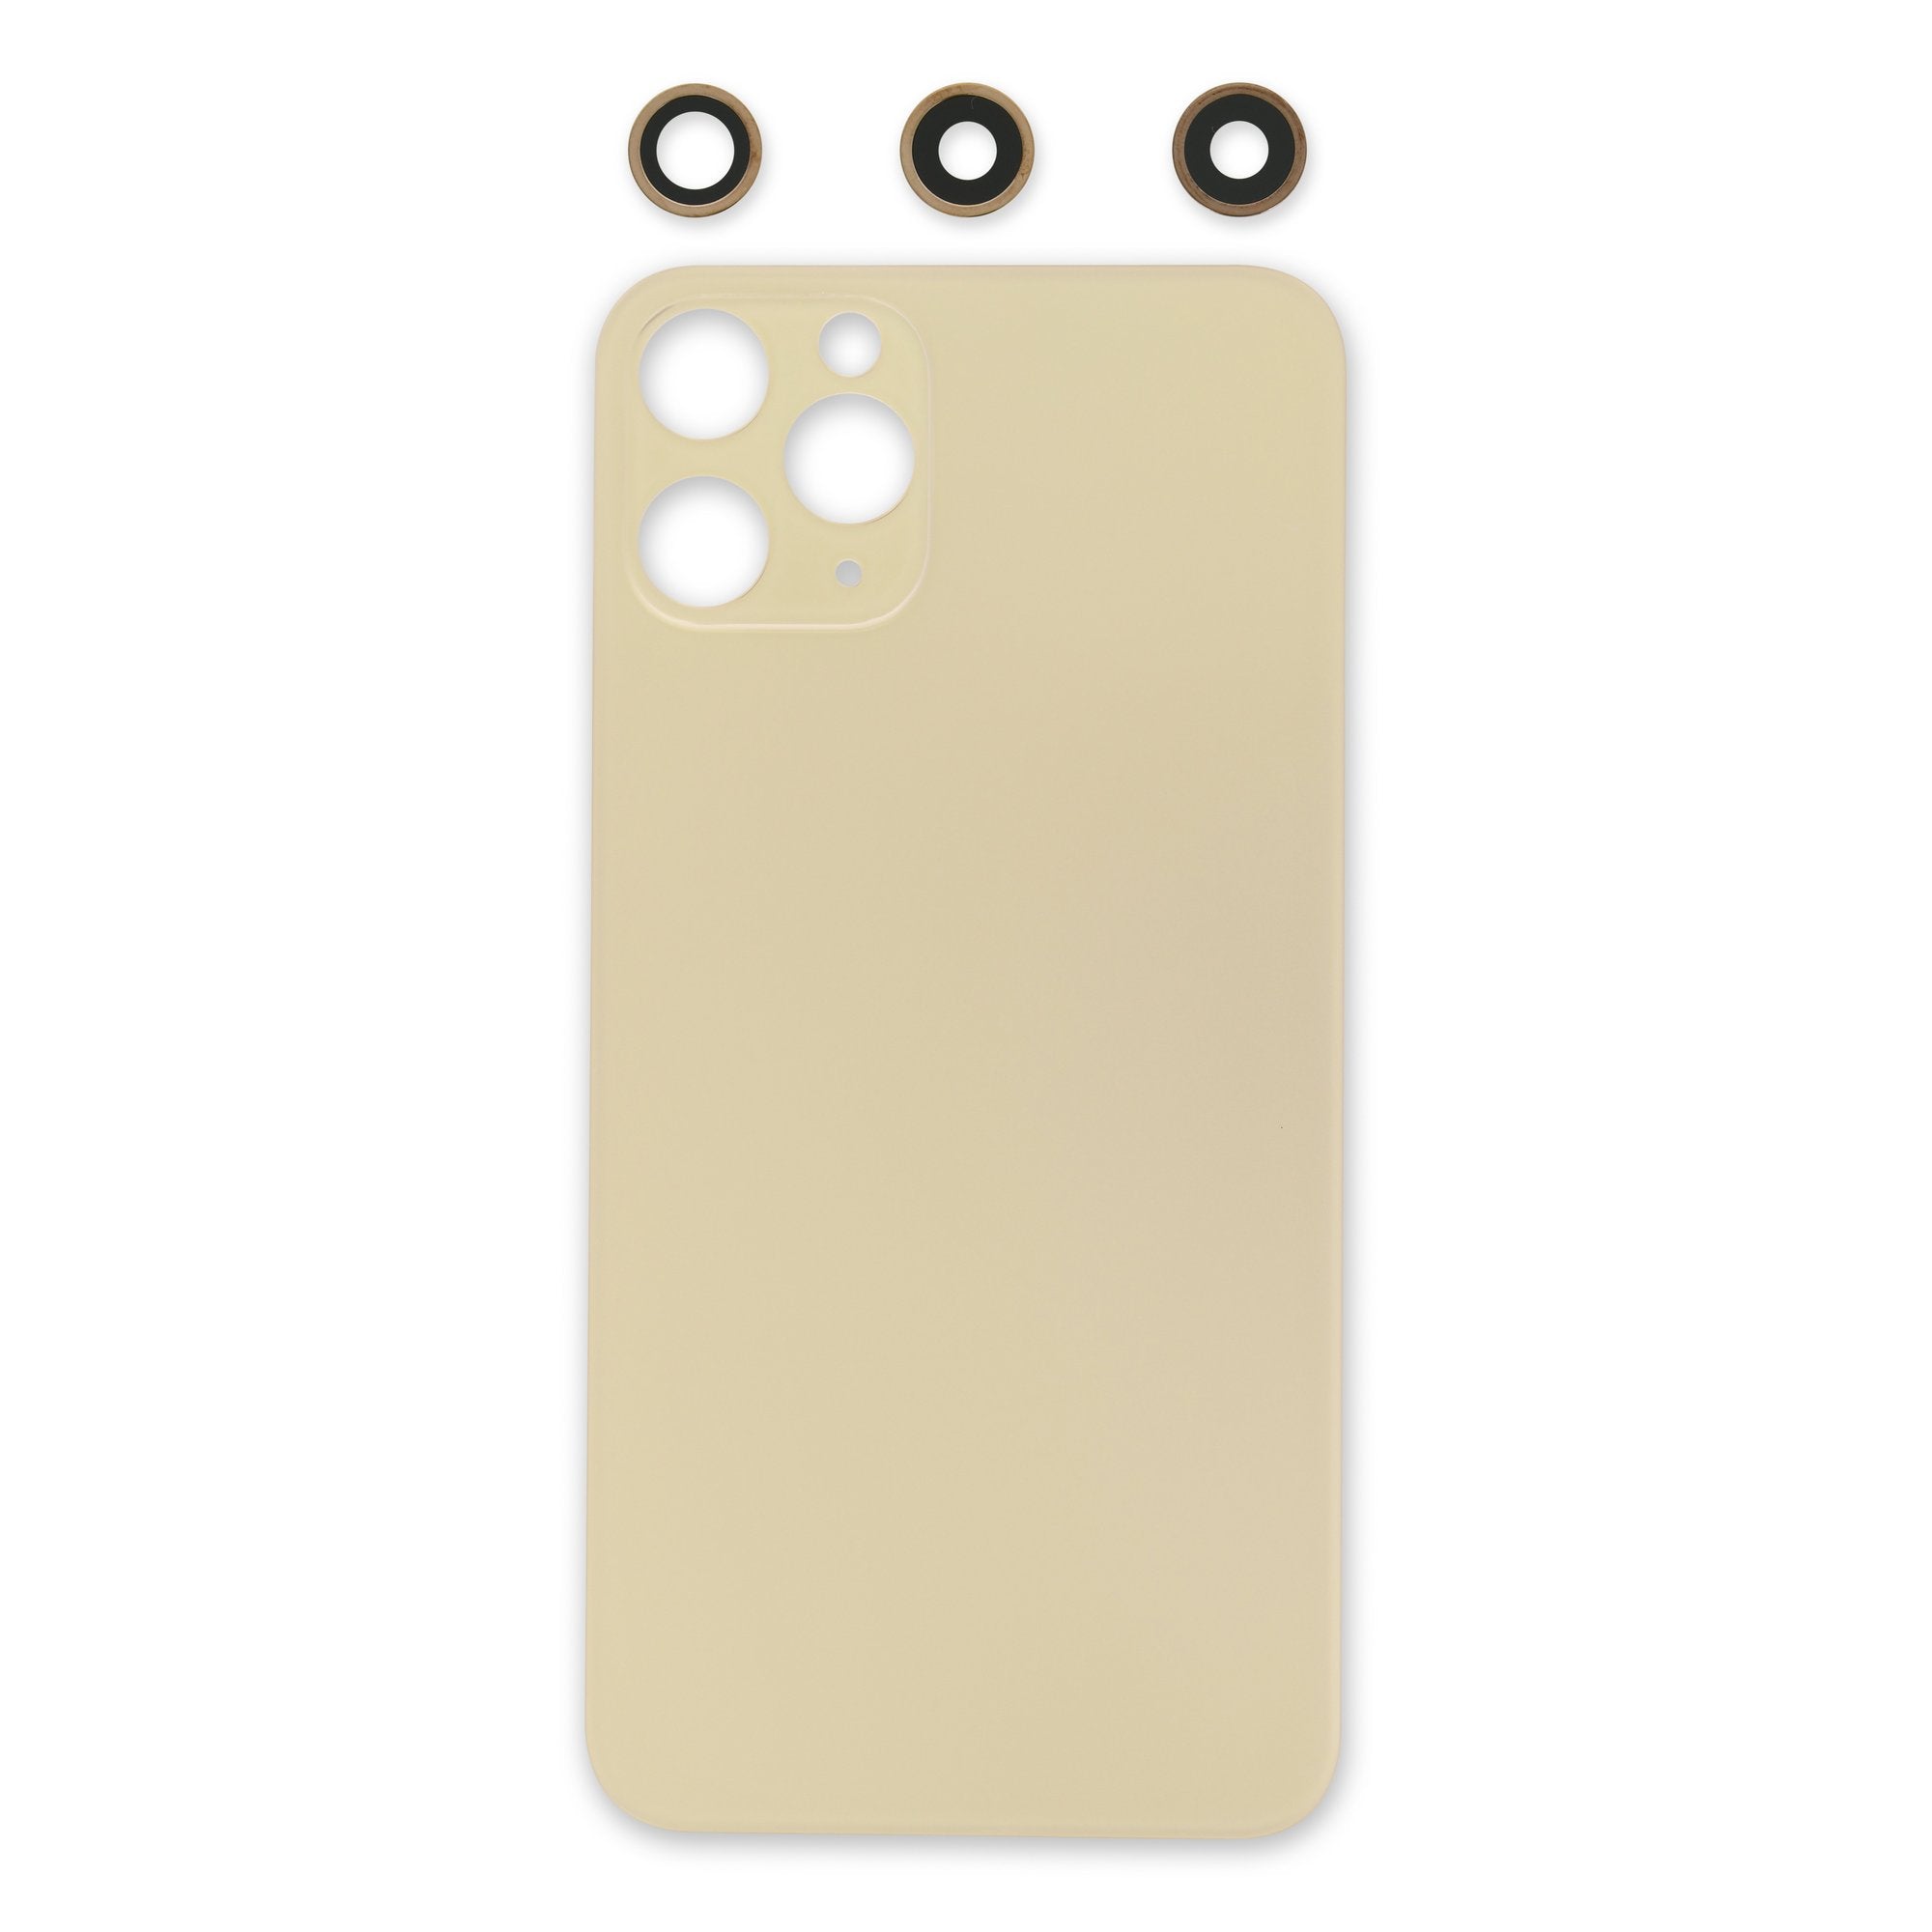 iPhone 11 Pro Aftermarket Blank Rear Glass Panel with Lens Covers Gold New